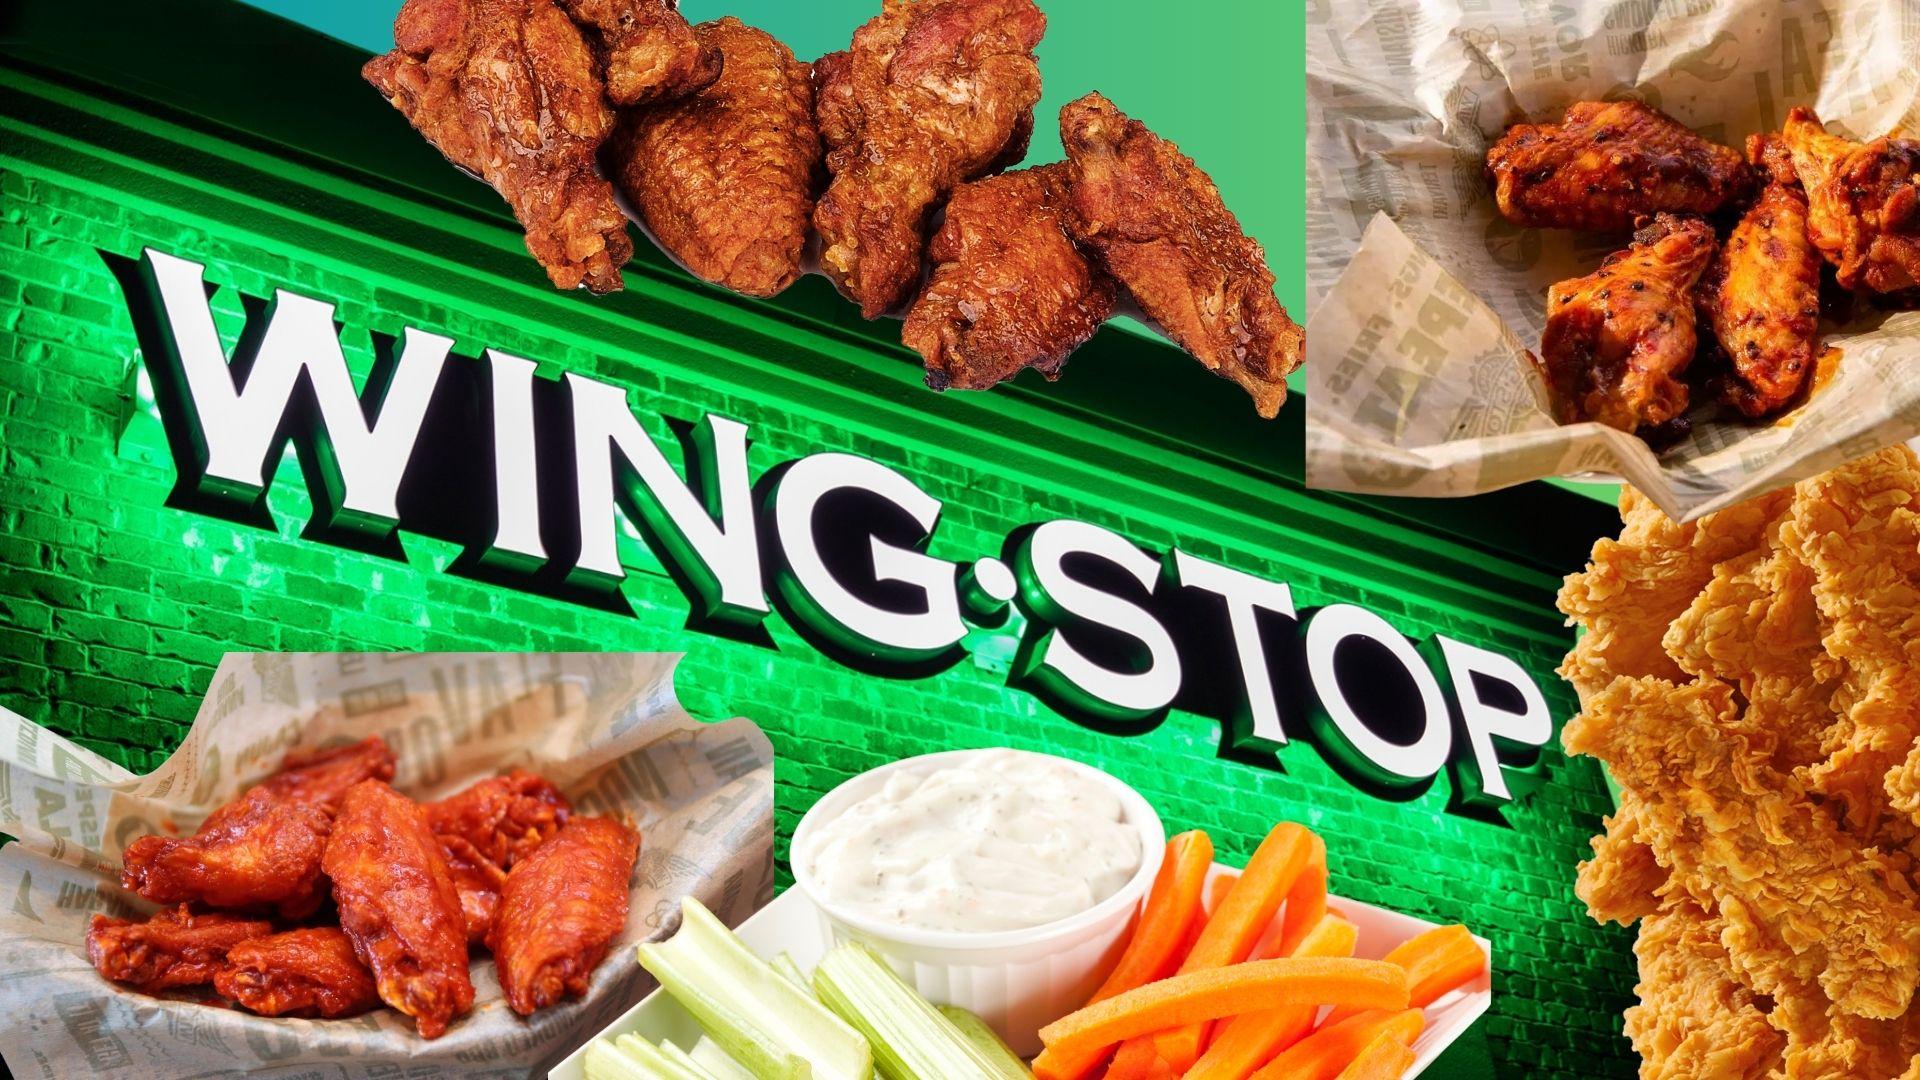 Wingstop logo and chicken wings